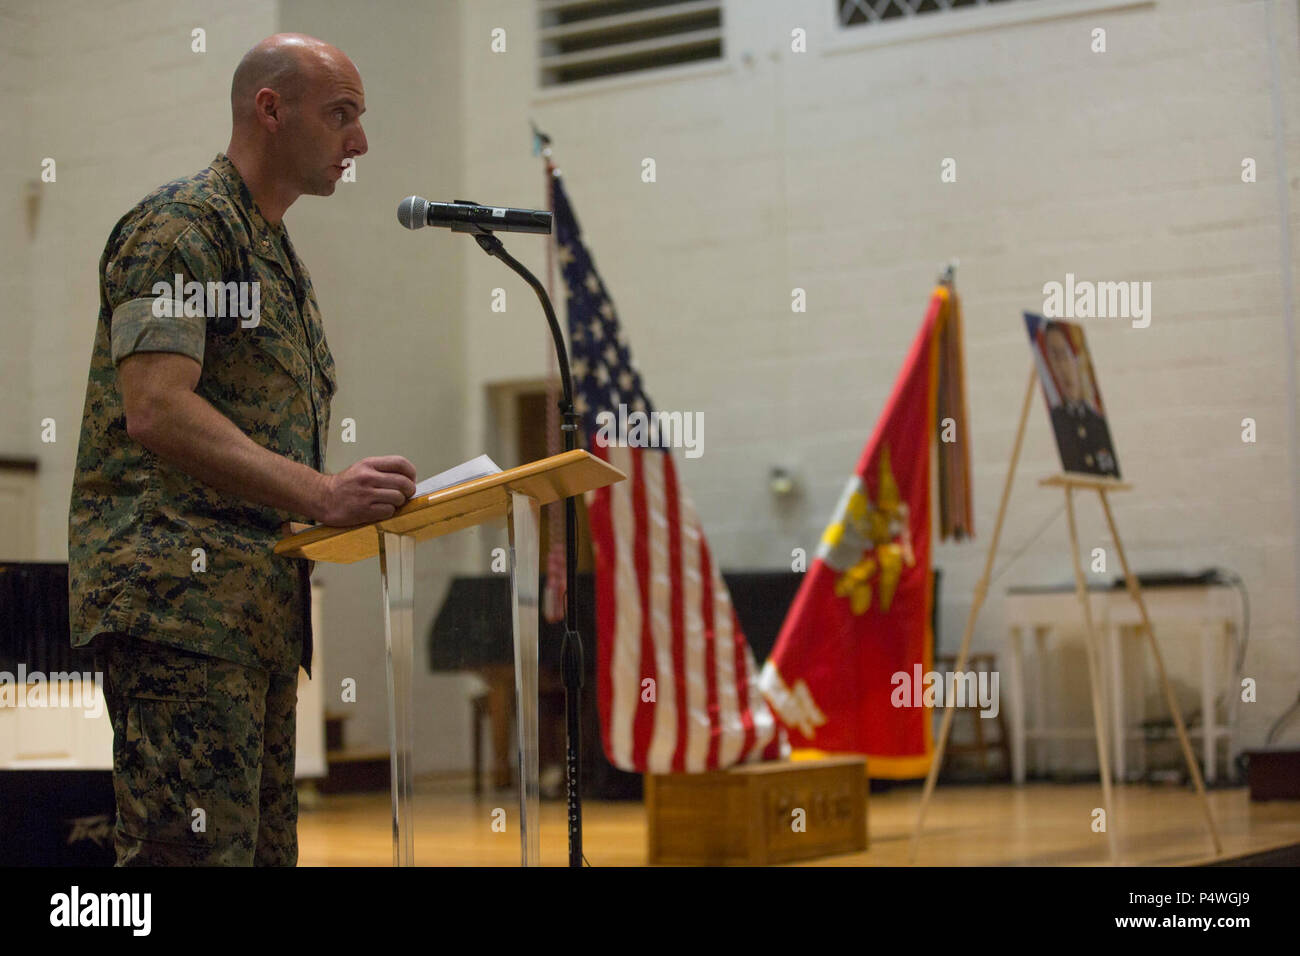 U.S. Marine Corps Chief Warrant Officer 2 John R. Handley, reads a passage during the memorial service for 1st Lt. Garrett C. Cheung on Camp Lejeune, N.C., May 9, 2017. 1st Lt. Cheung is survived by his parents, ALexander and Florence Cheung and his sister, Brigette. Stock Photo